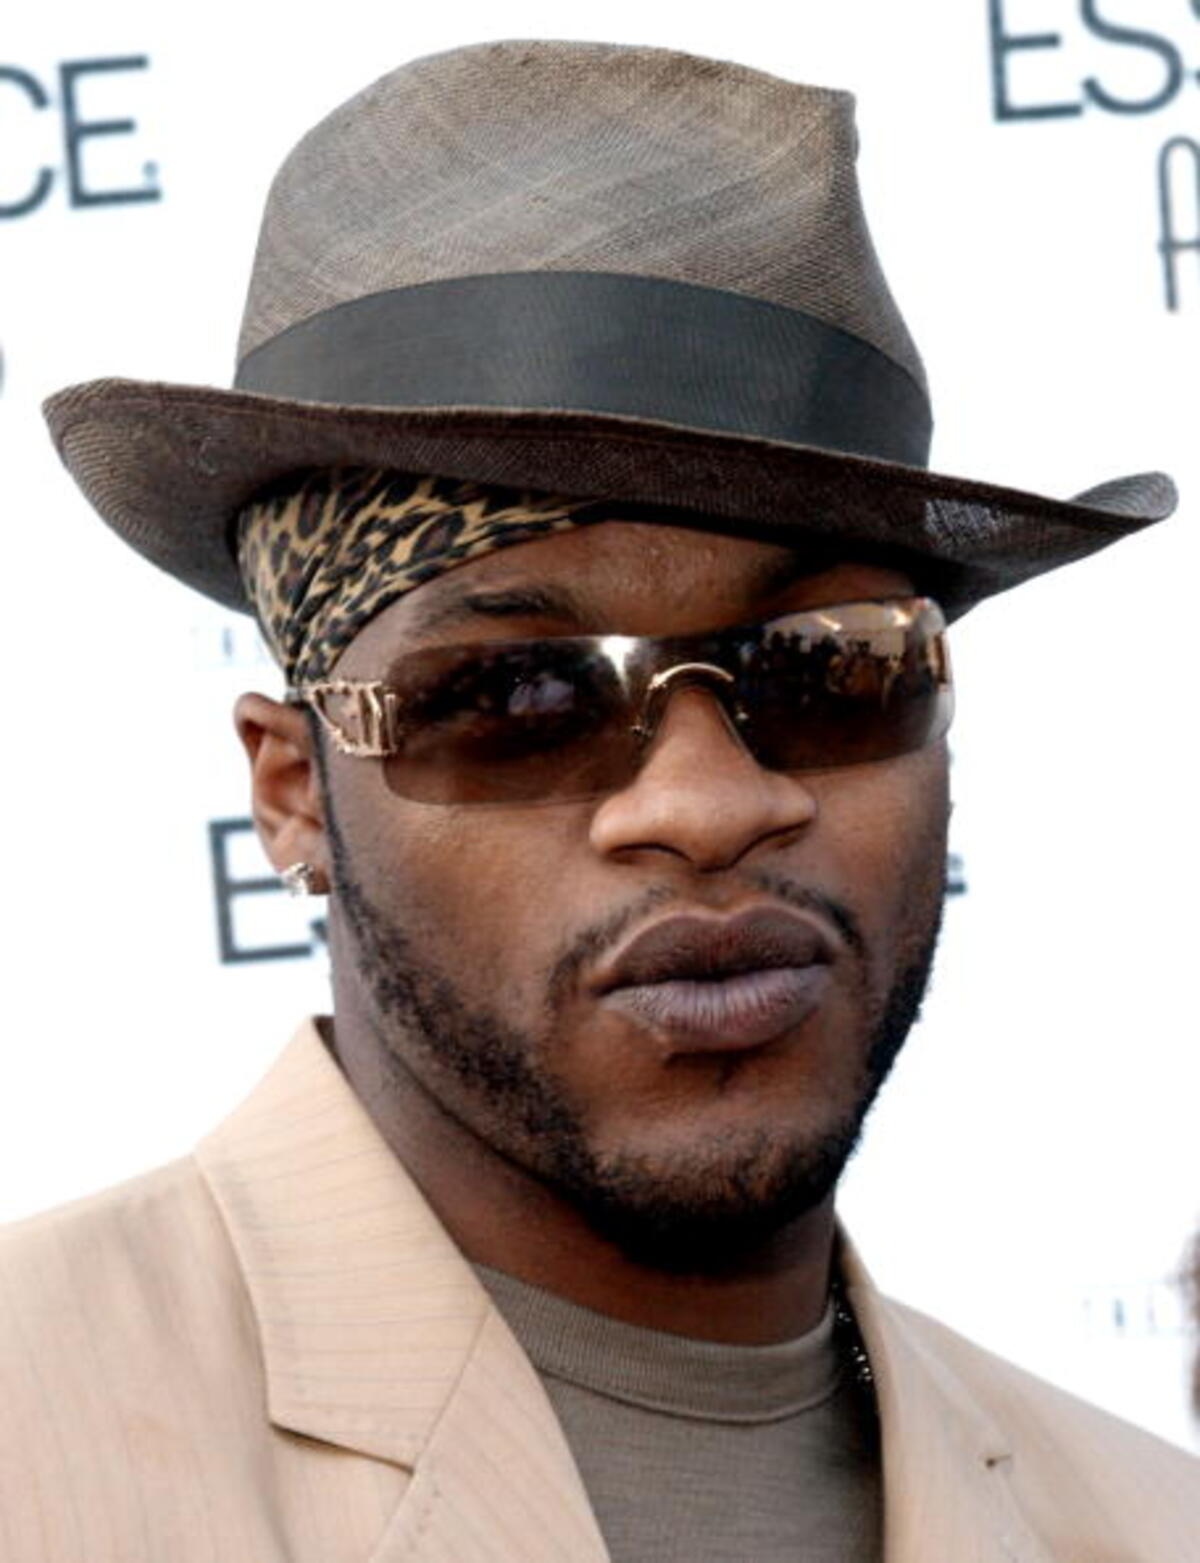 R&B singer Jaheim Hoagland charged after dogs found in water-filled crates, police say